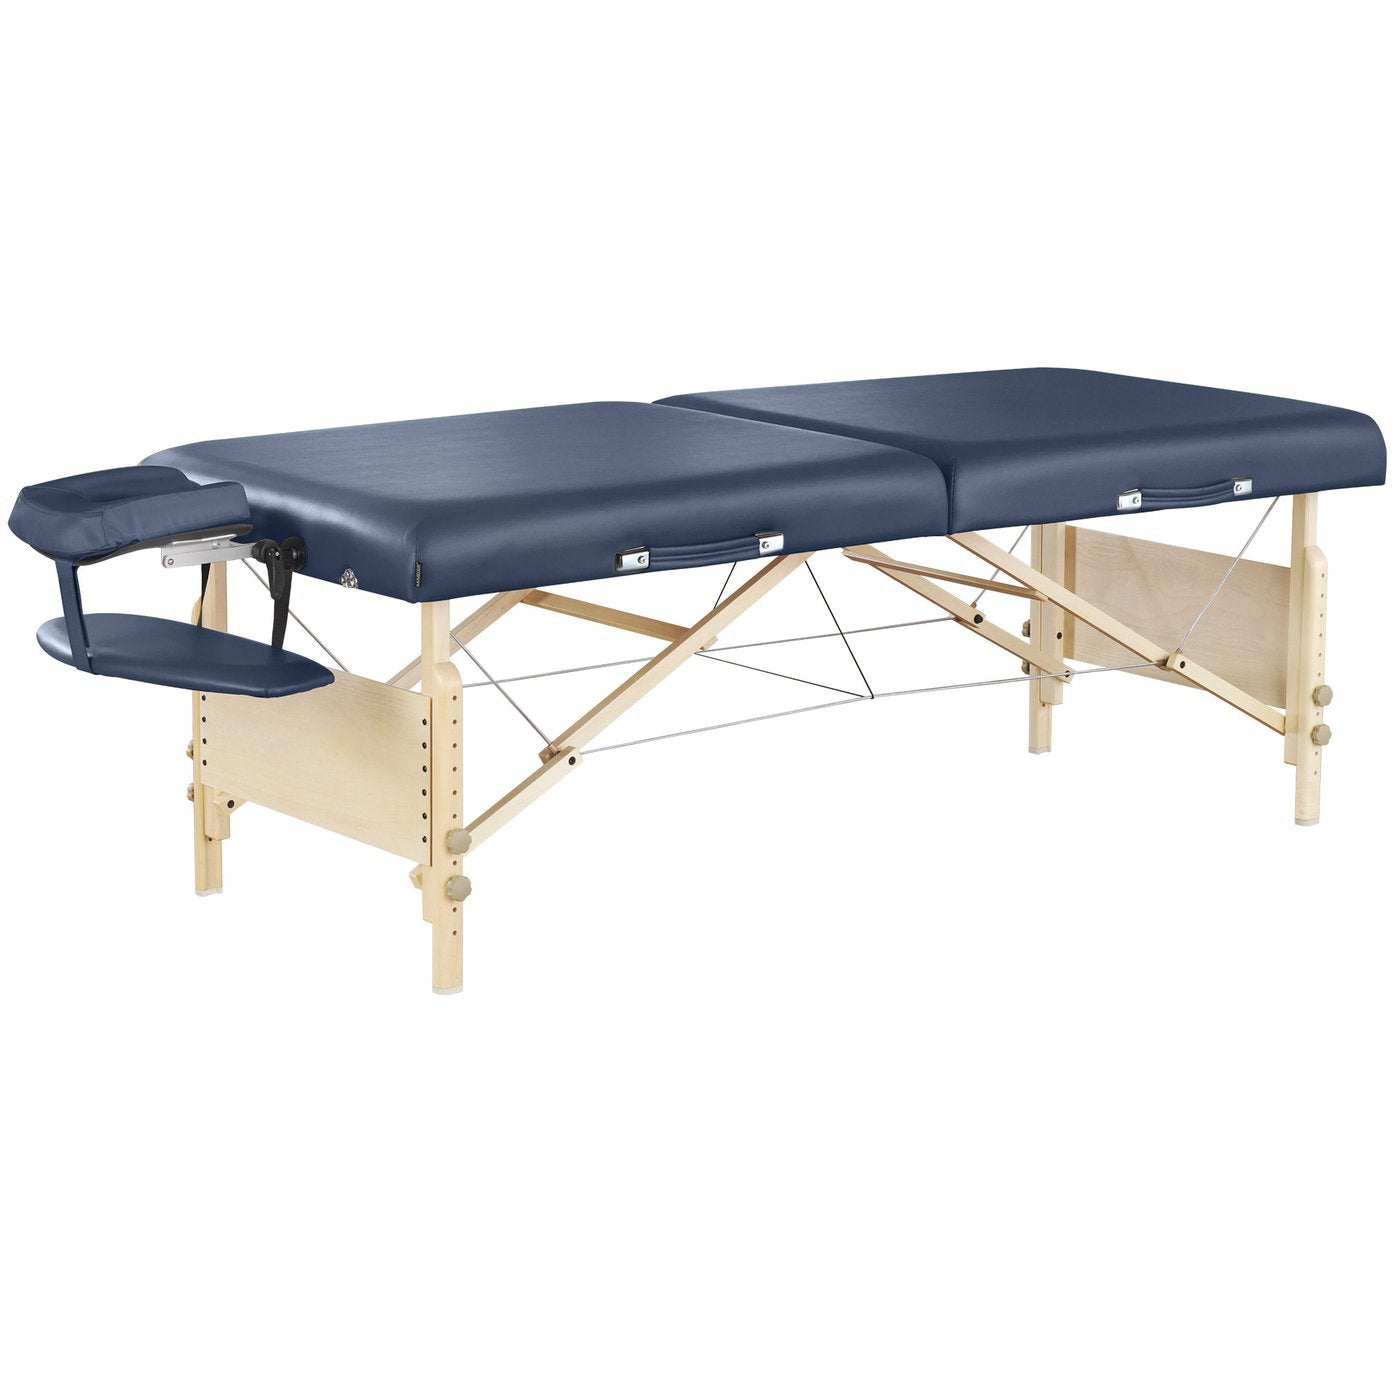 30" CORONADO™ Portable Massage Table Package with 3" Thick Cushion of Foam for Maximum Comfort! (Royal Blue Color)